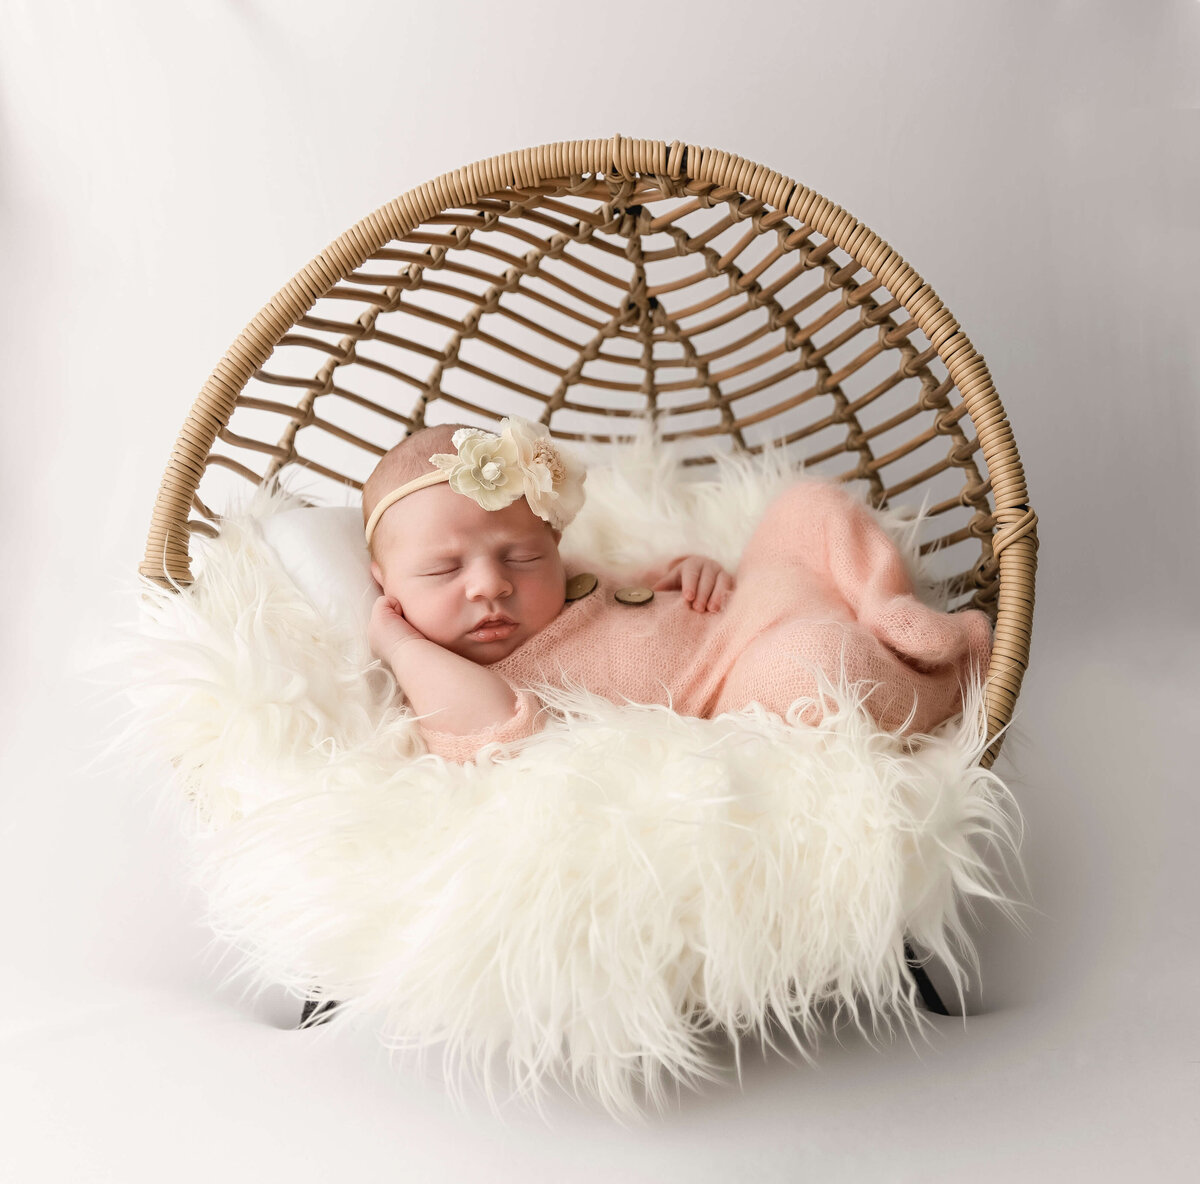 Newborn baby girl in a sleeper posed in a bamboo posing chair in an Erie Pa photography studio